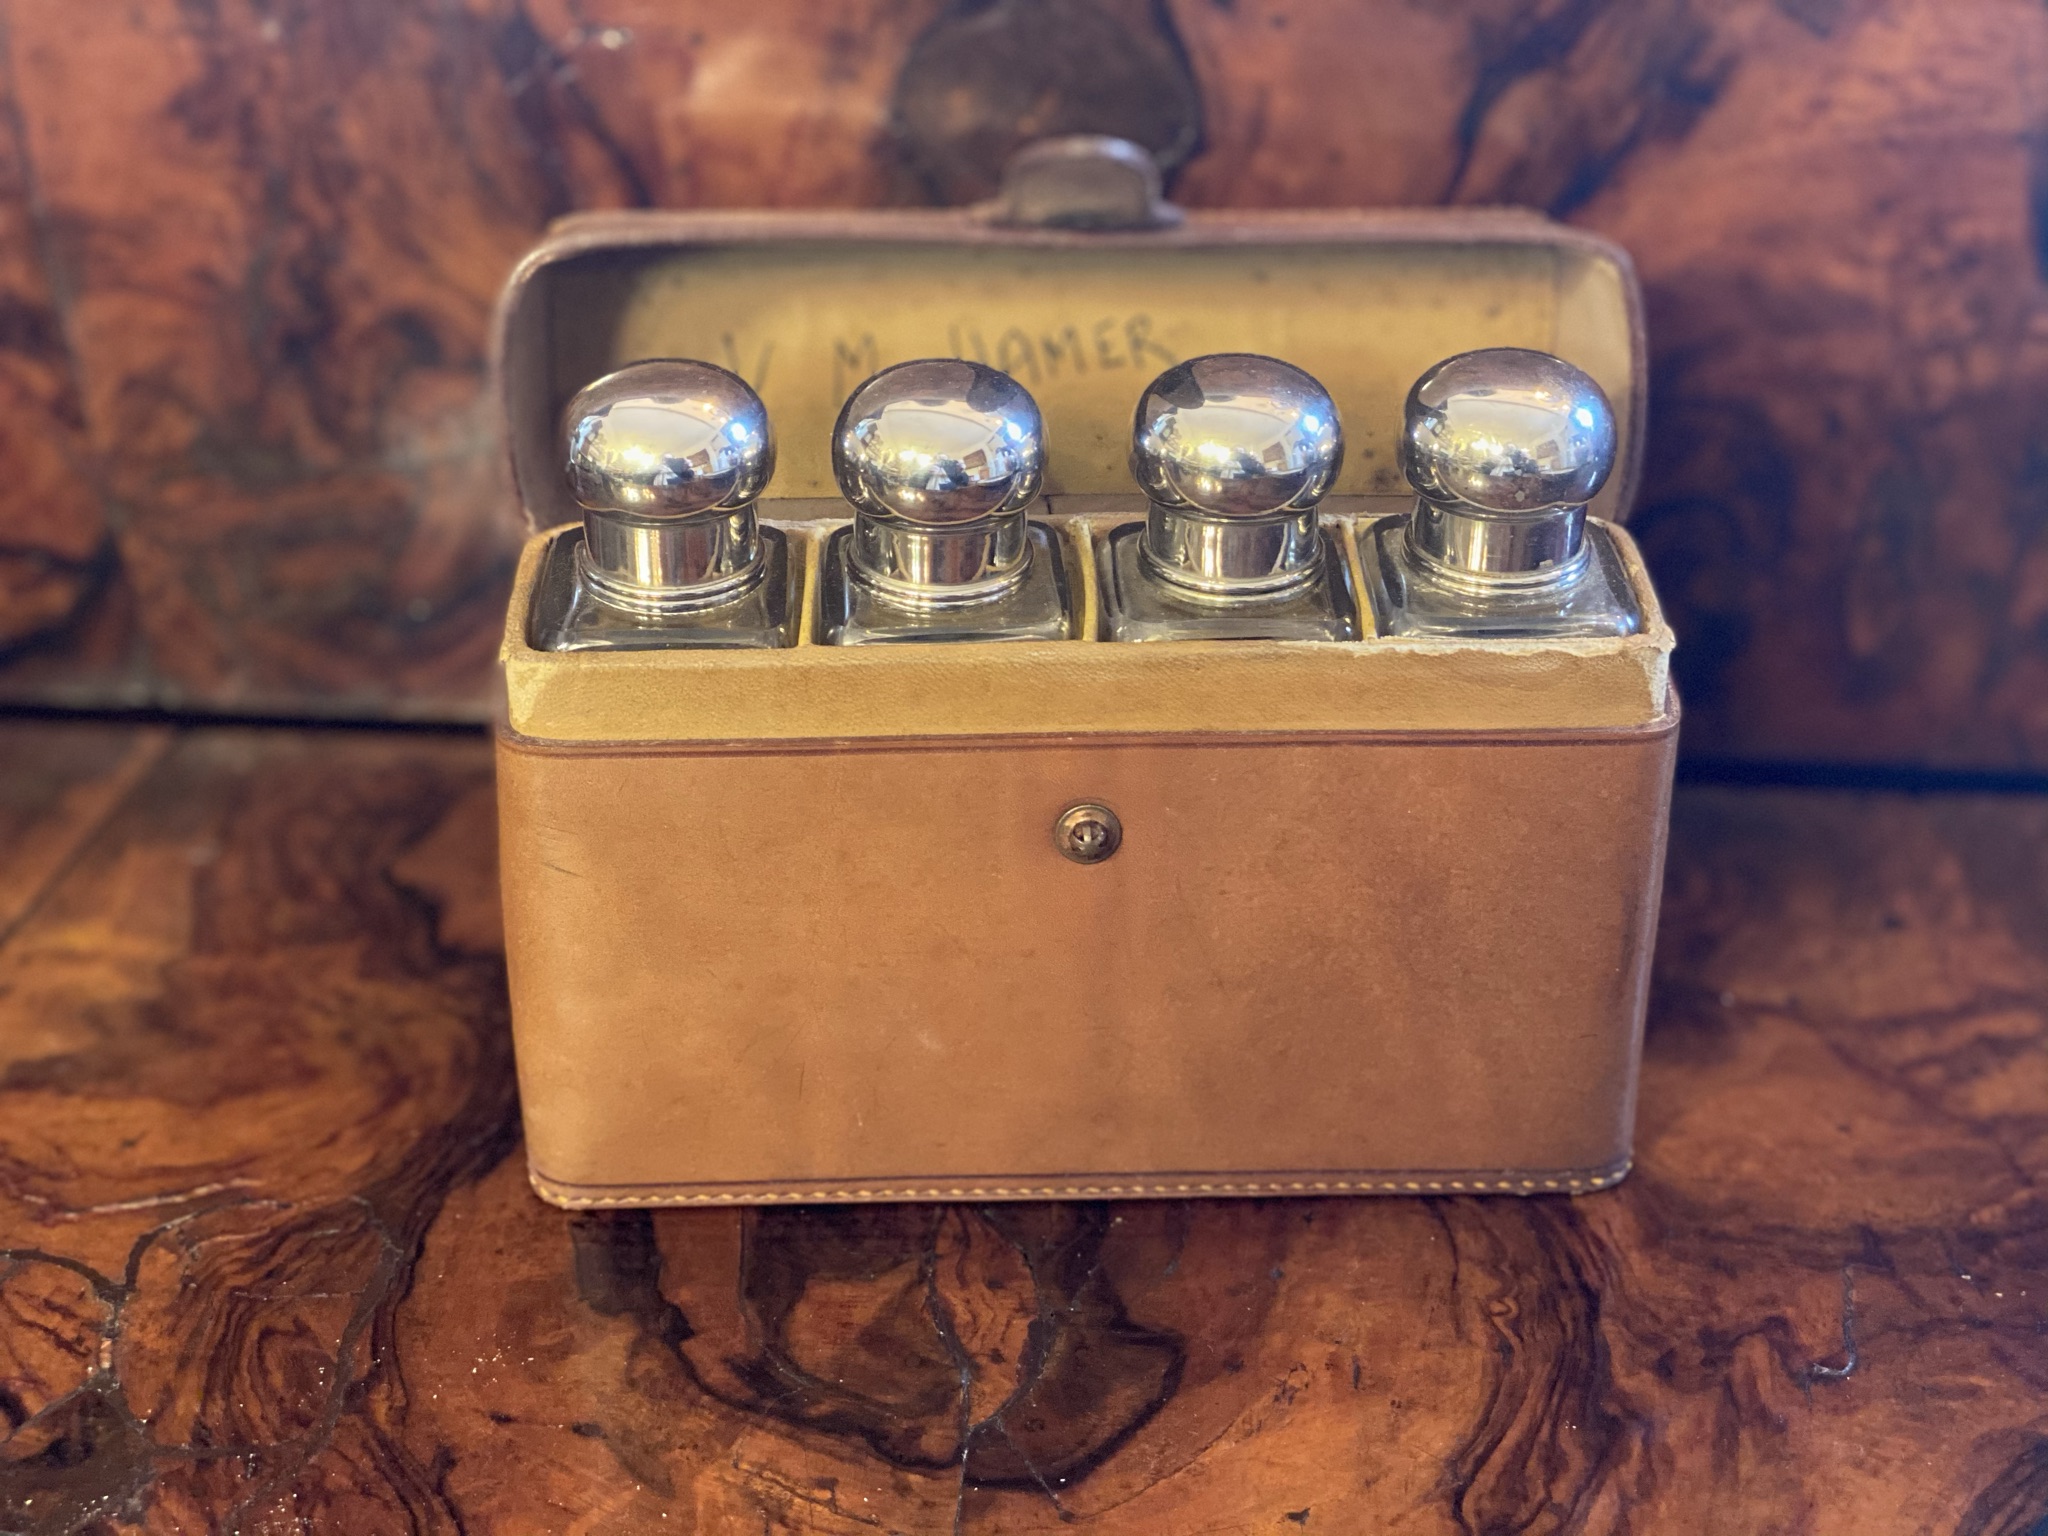 Travelling or campaign four bottle flasks in leather container - Image 3 of 7